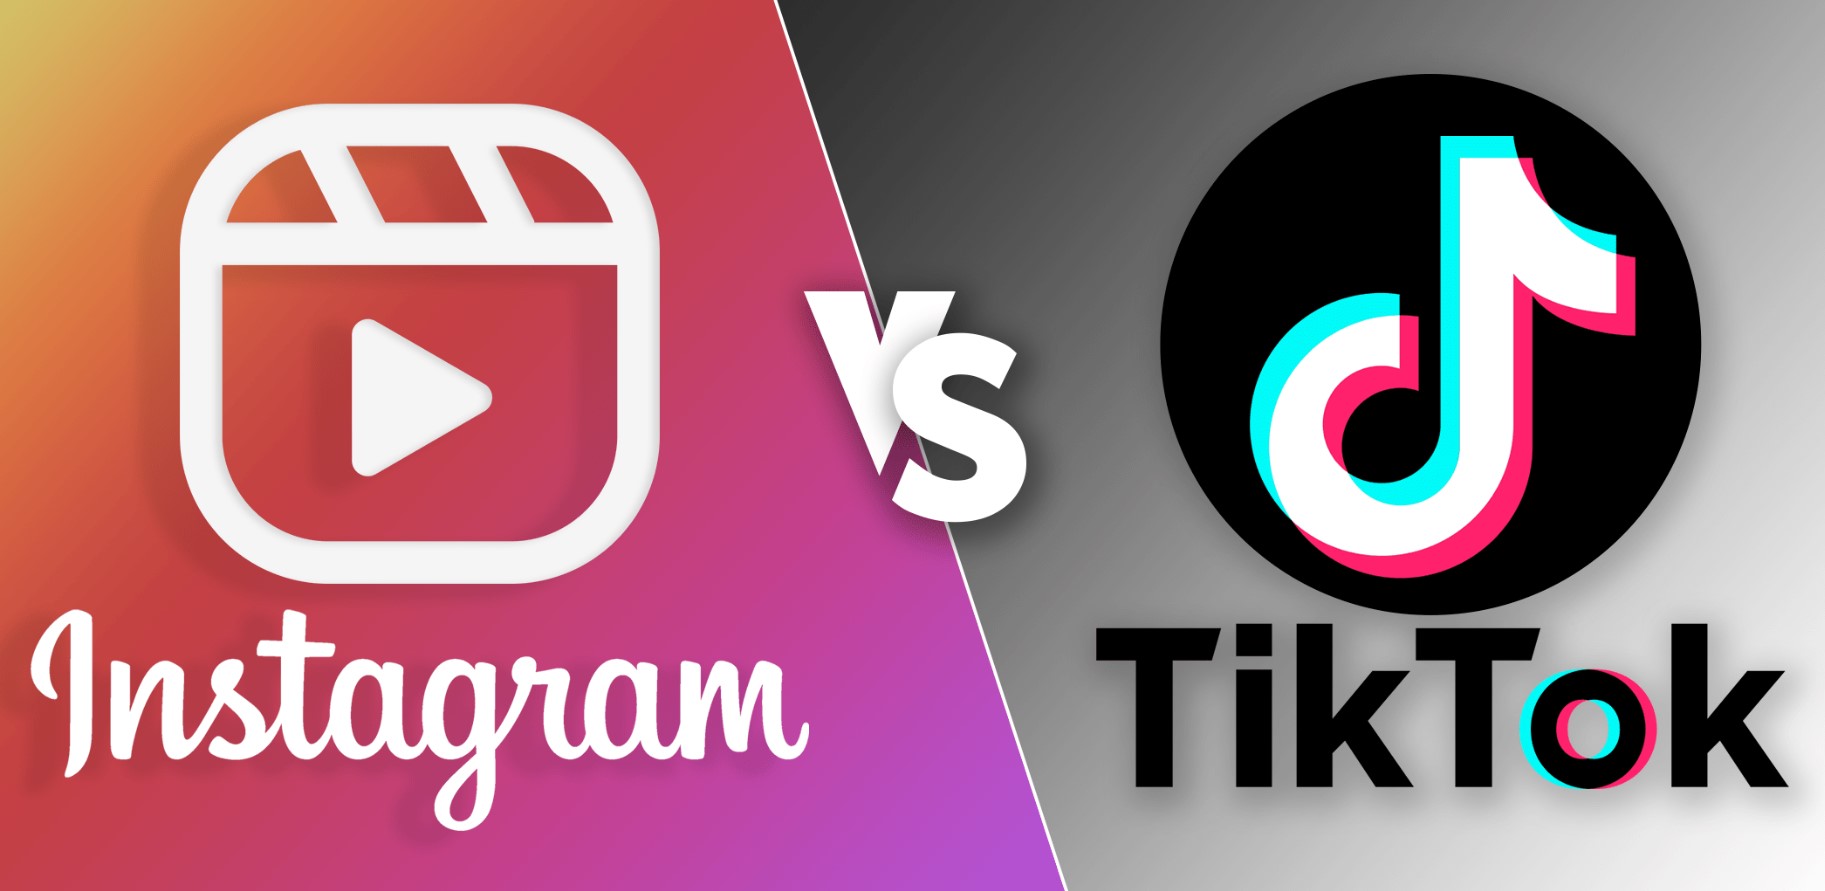 Instagram to TikTok: How to Convert and Share Content Seamlessly